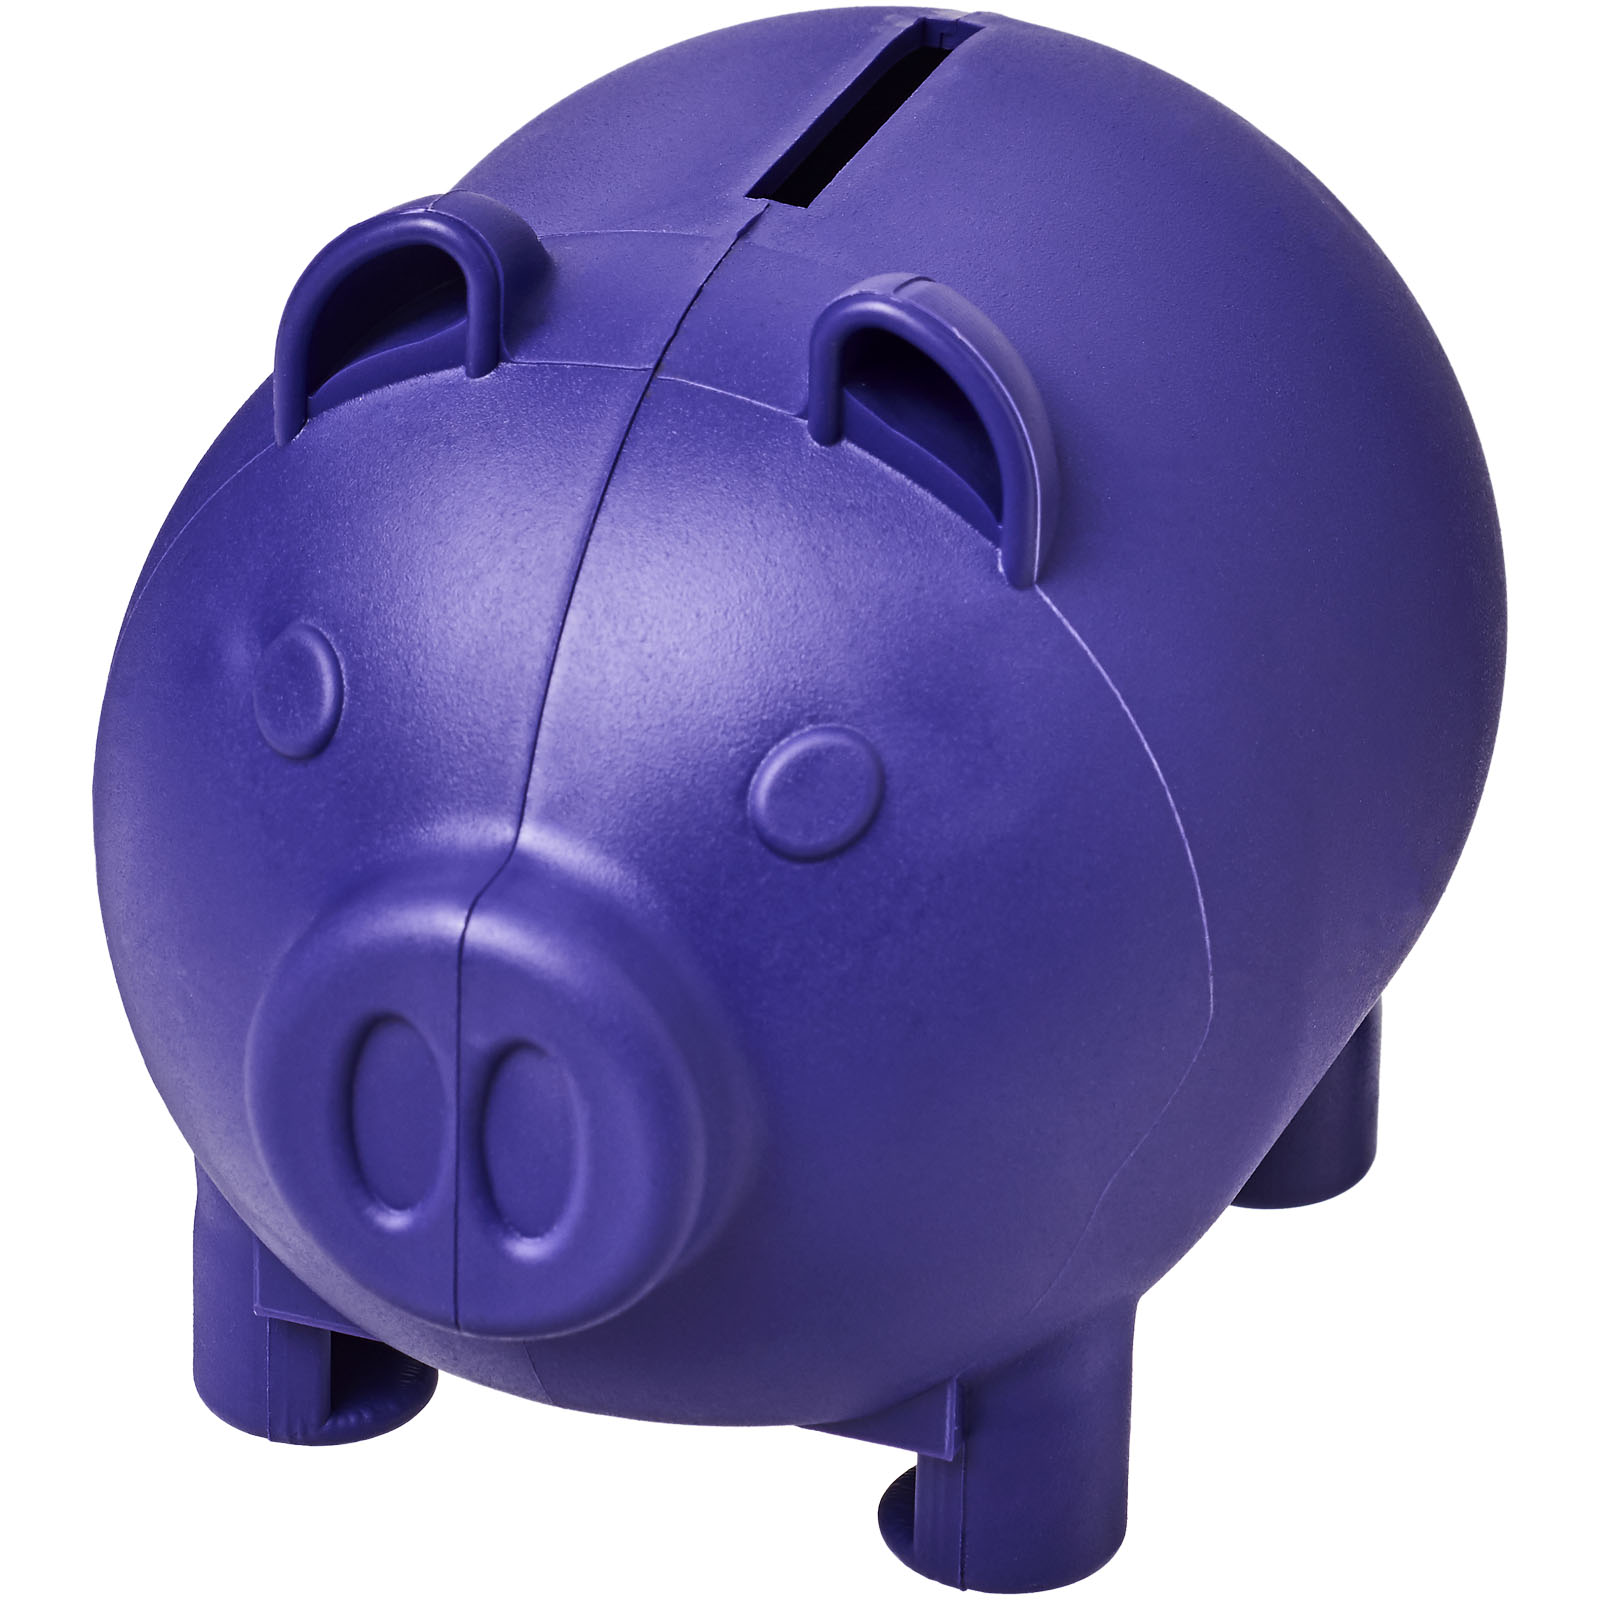 Home & Kitchen - Oink small piggy bank